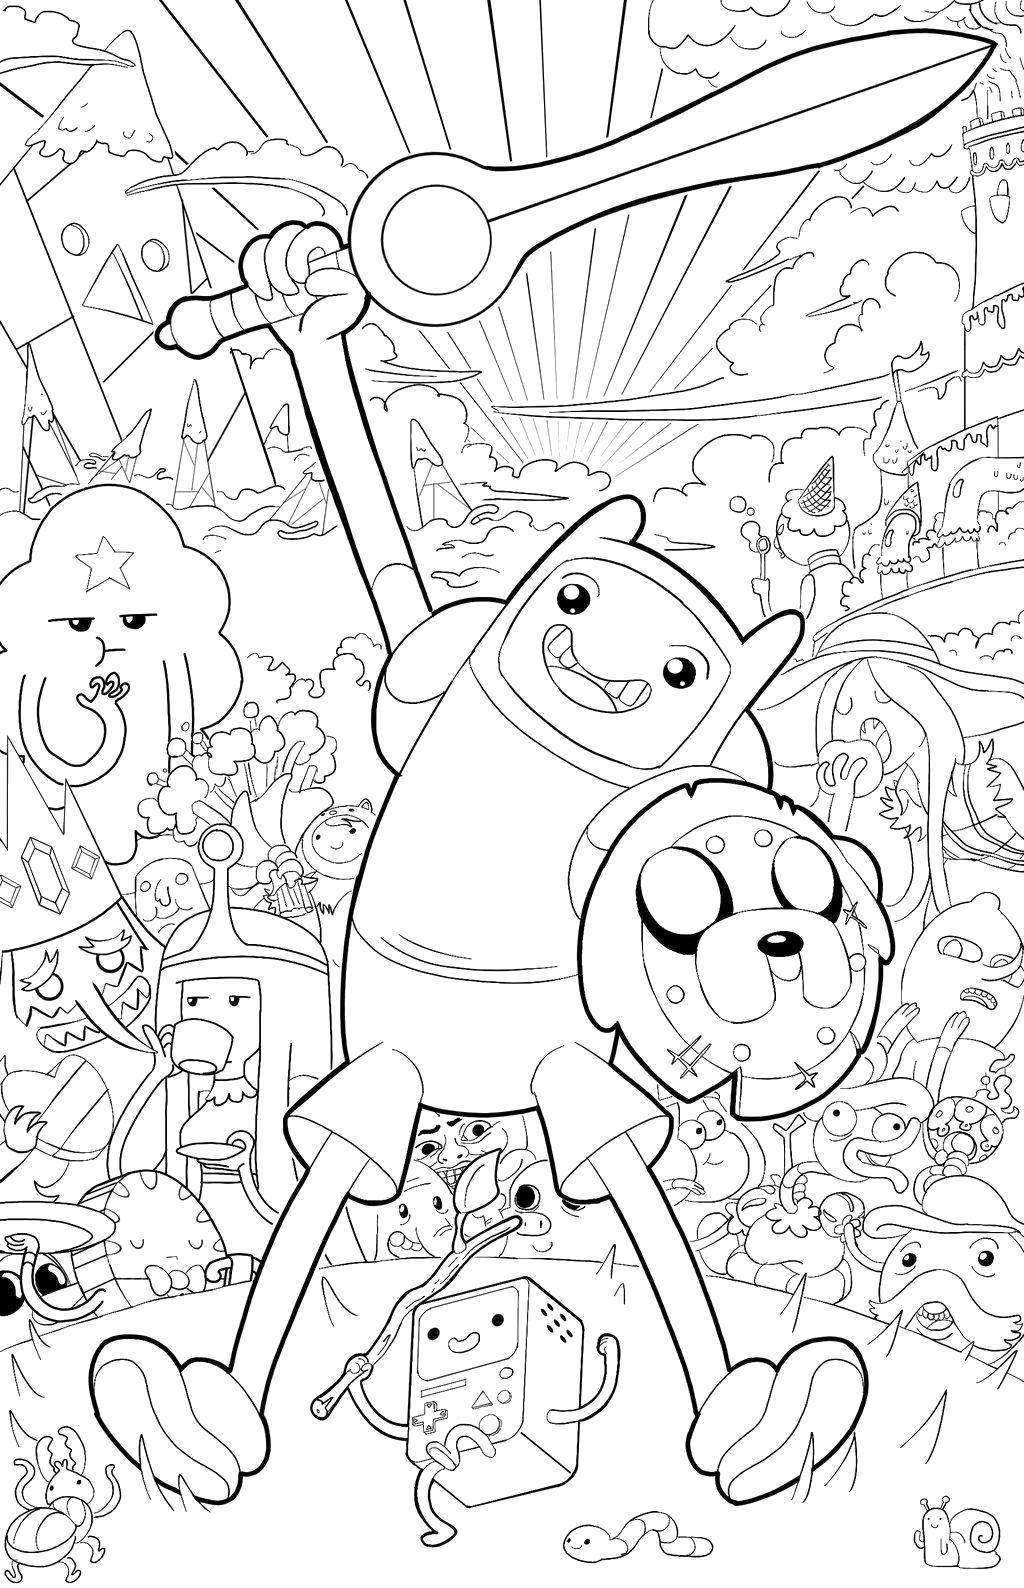 Coloring Adventure time!. Category adventure time. Tags:  The character from the cartoon, Adventure Time.